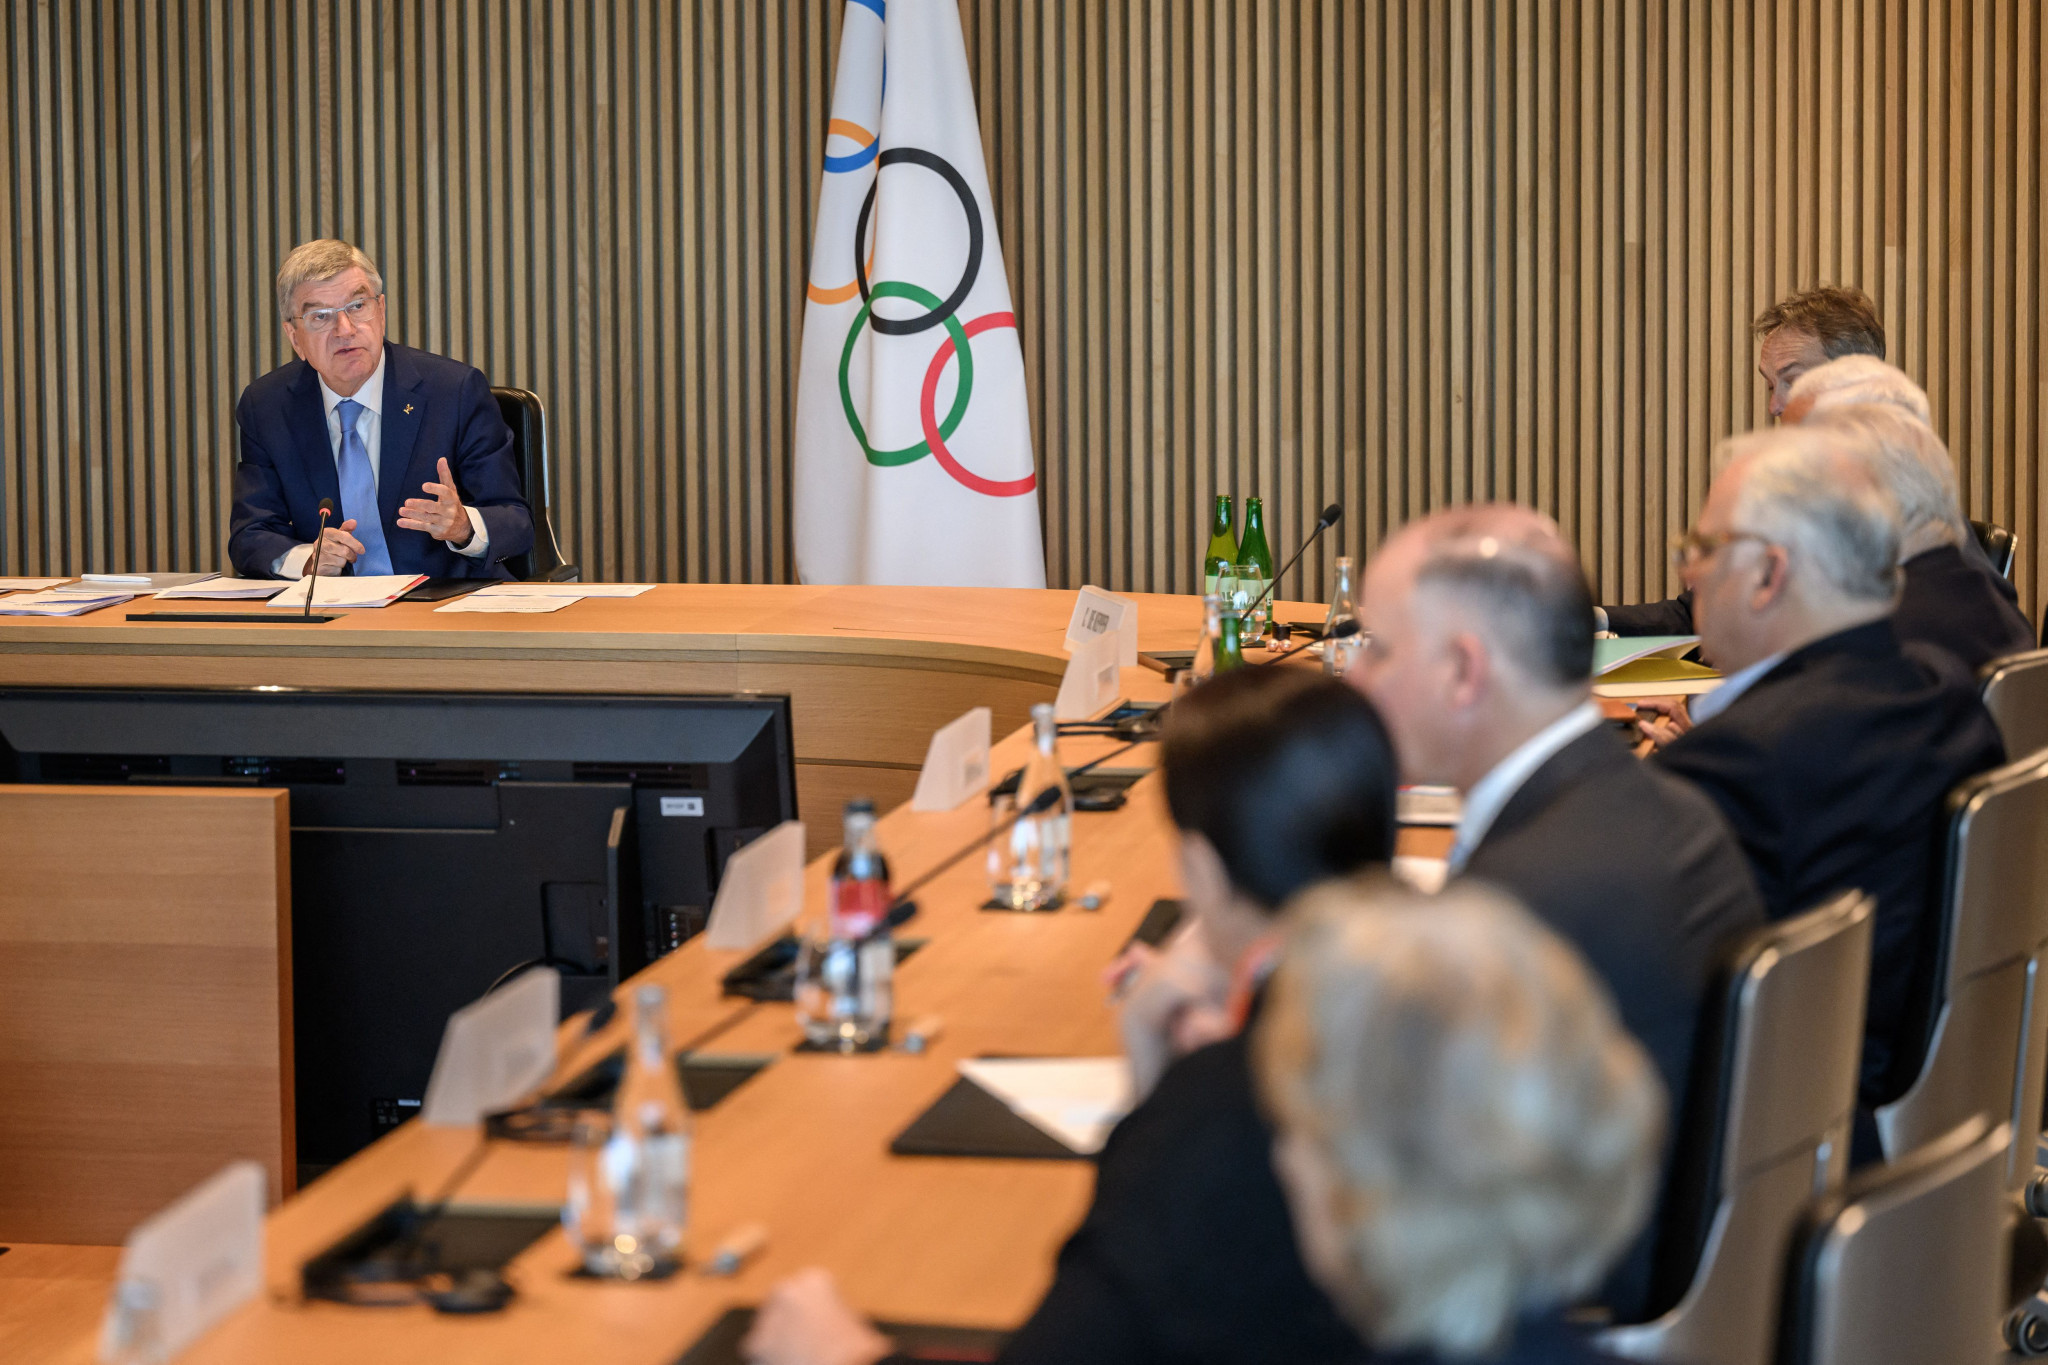 The International Olympic Committee Executive Board recommendations have been criticised by figures in Russia and Ukraine ©Getty Images